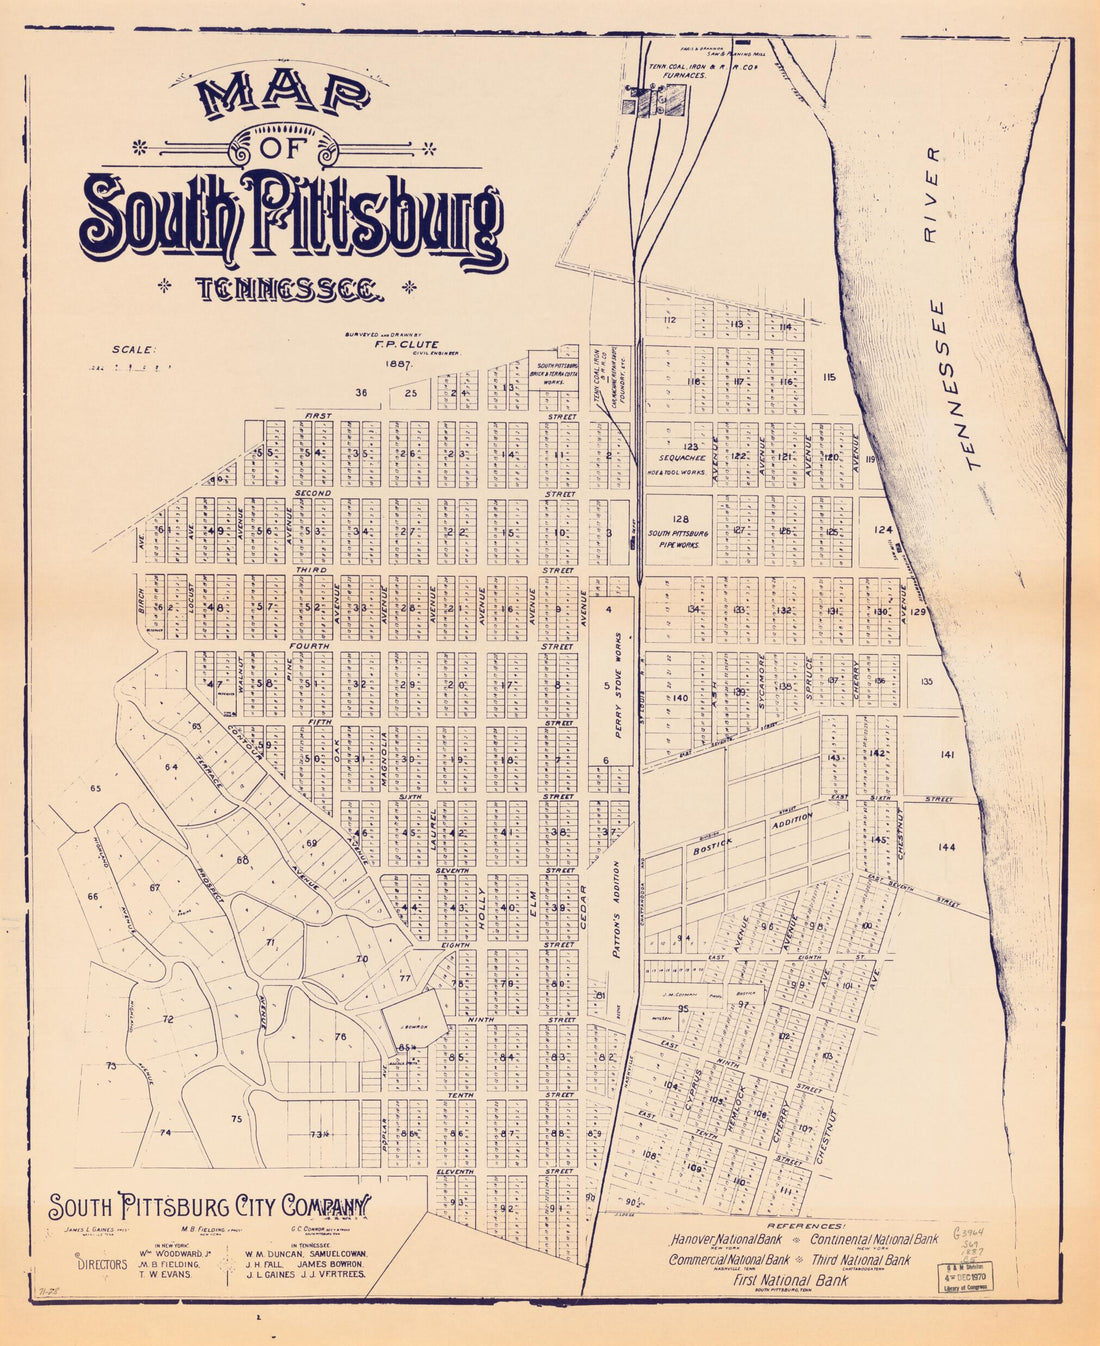 This old map of Map of South Pittsburg, Tennessee from 1887 was created by F. P. Clute,  South Pittsburg City Company in 1887